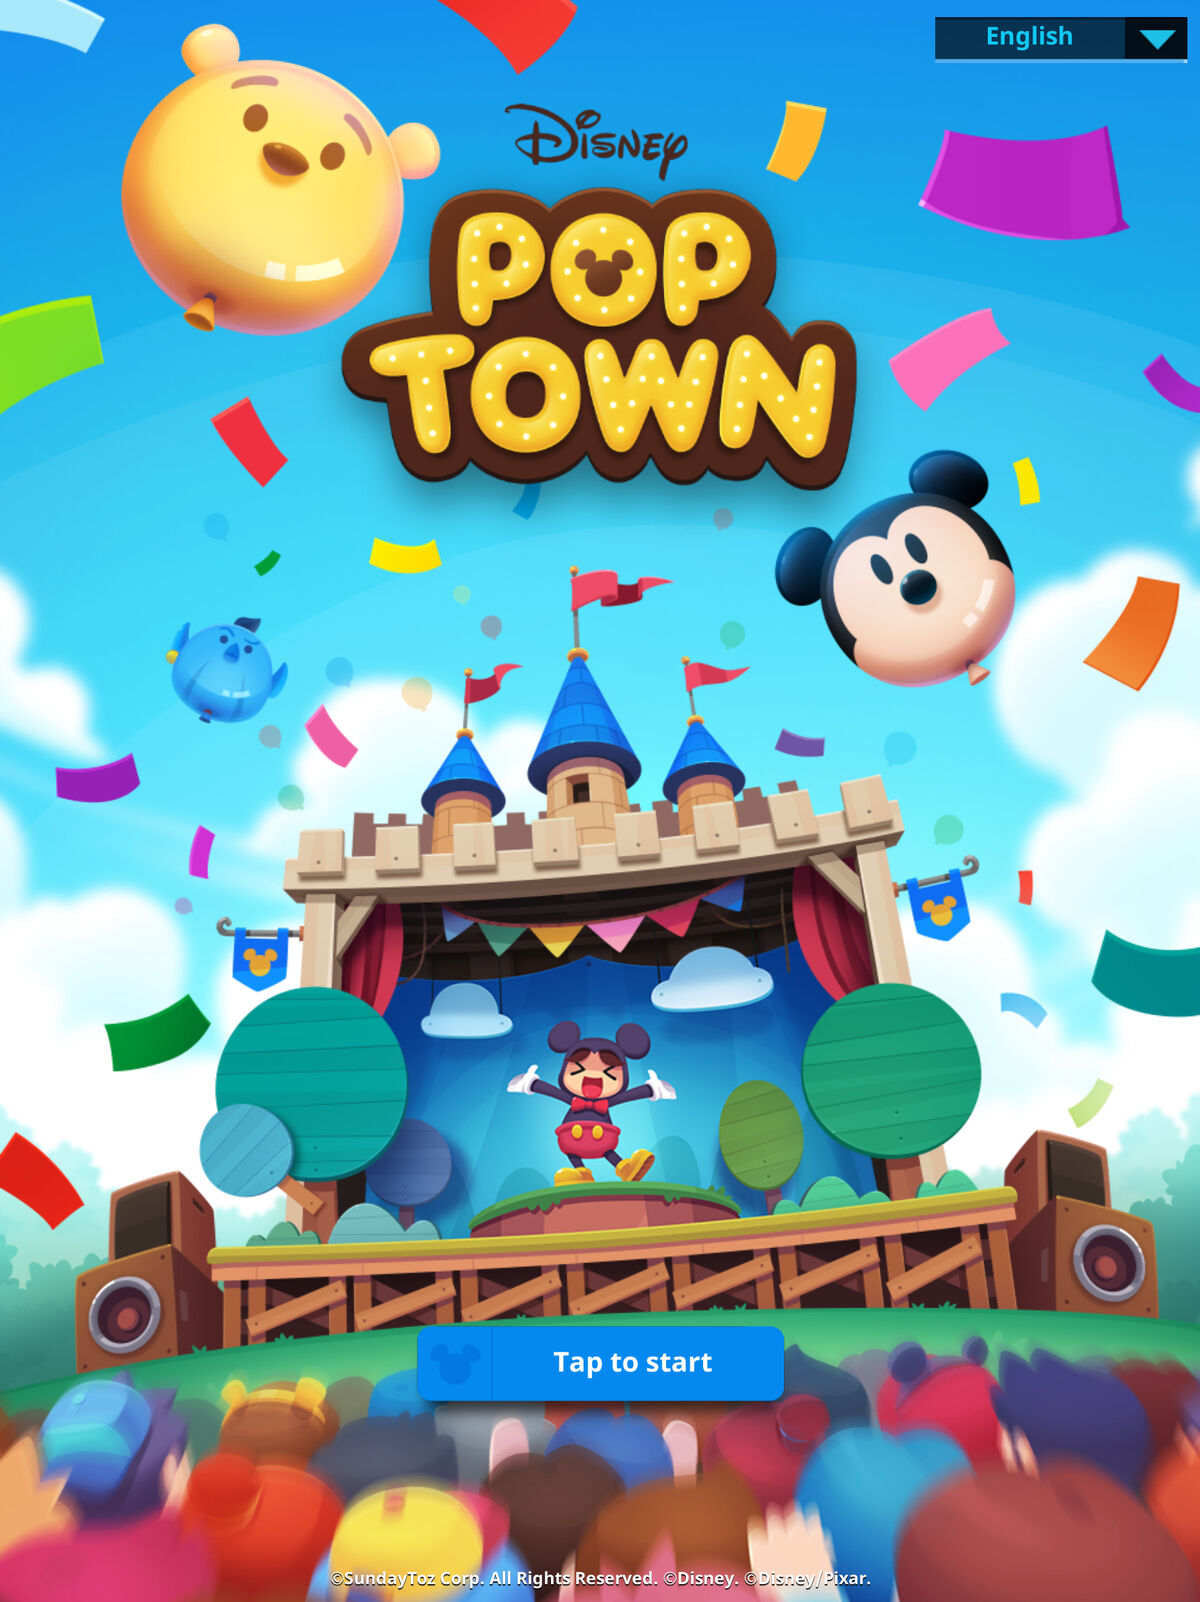 https://static.wikia.nocookie.net/disney/images/d/d6/Disney_Pop_Town_opening_screen.jpg/revision/latest/scale-to-width-down/1200?cb=20210216200700